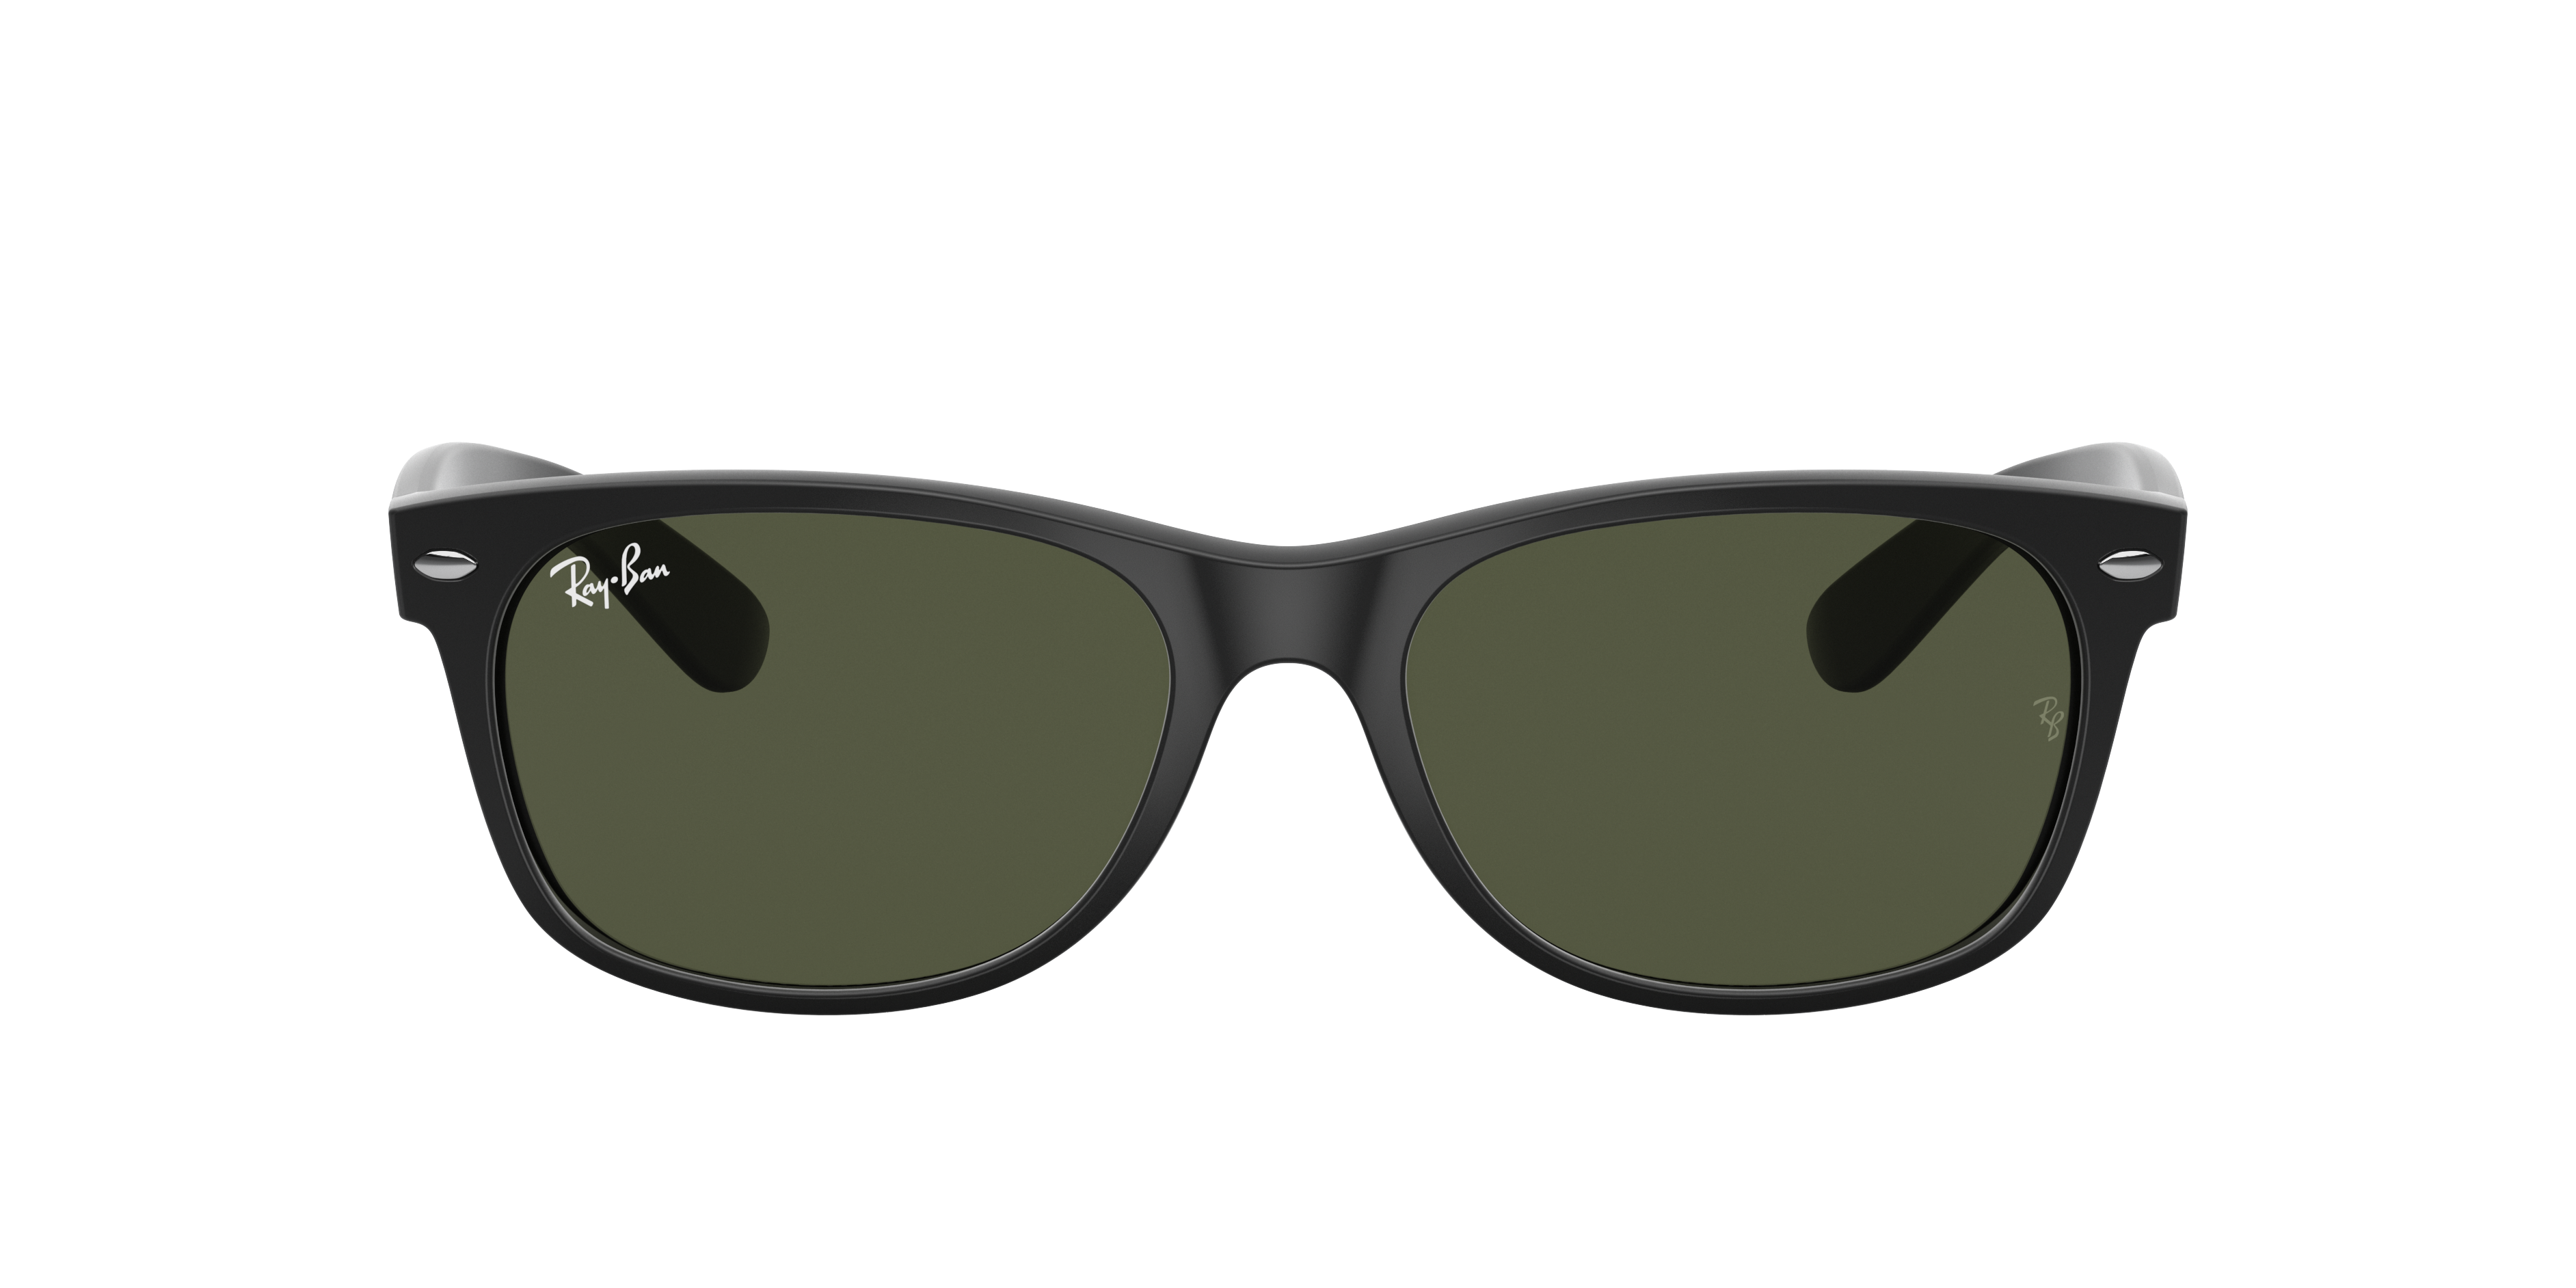 Men's Sunglasses Collection | Ray-Ban 